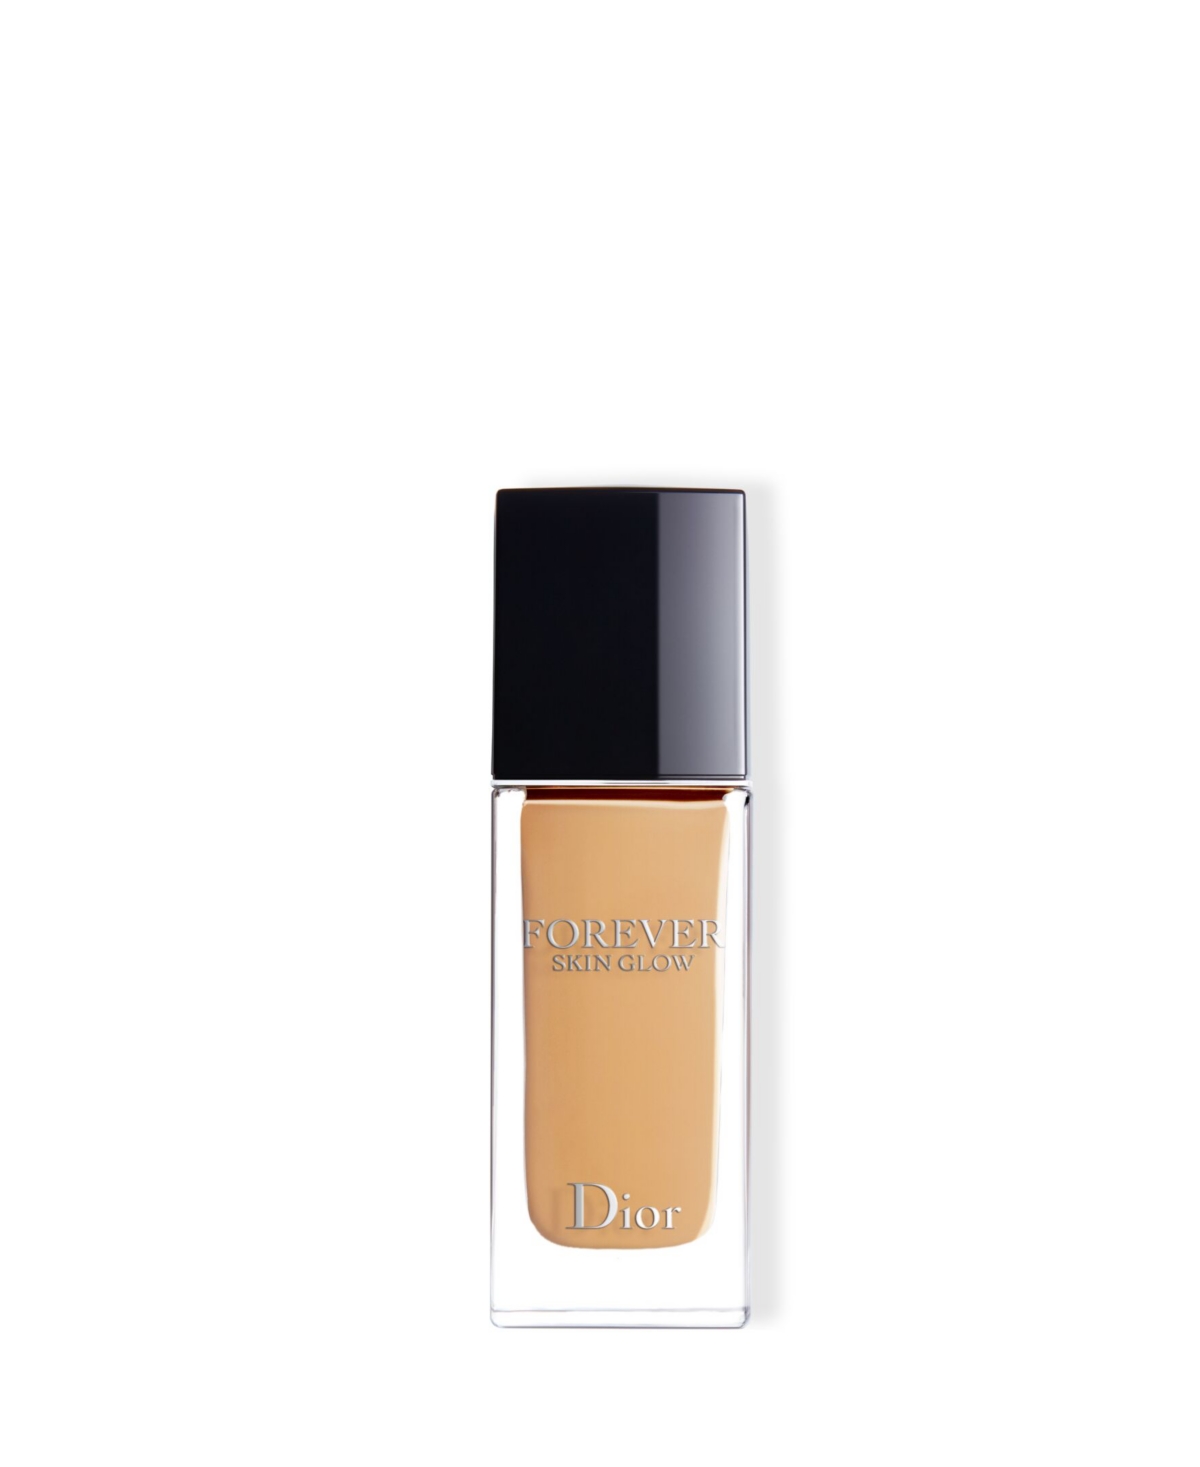 Dior Forever Skin Glow Hydrating Foundation Spf 15 In . Warm (fair Skin With Warm Tones)